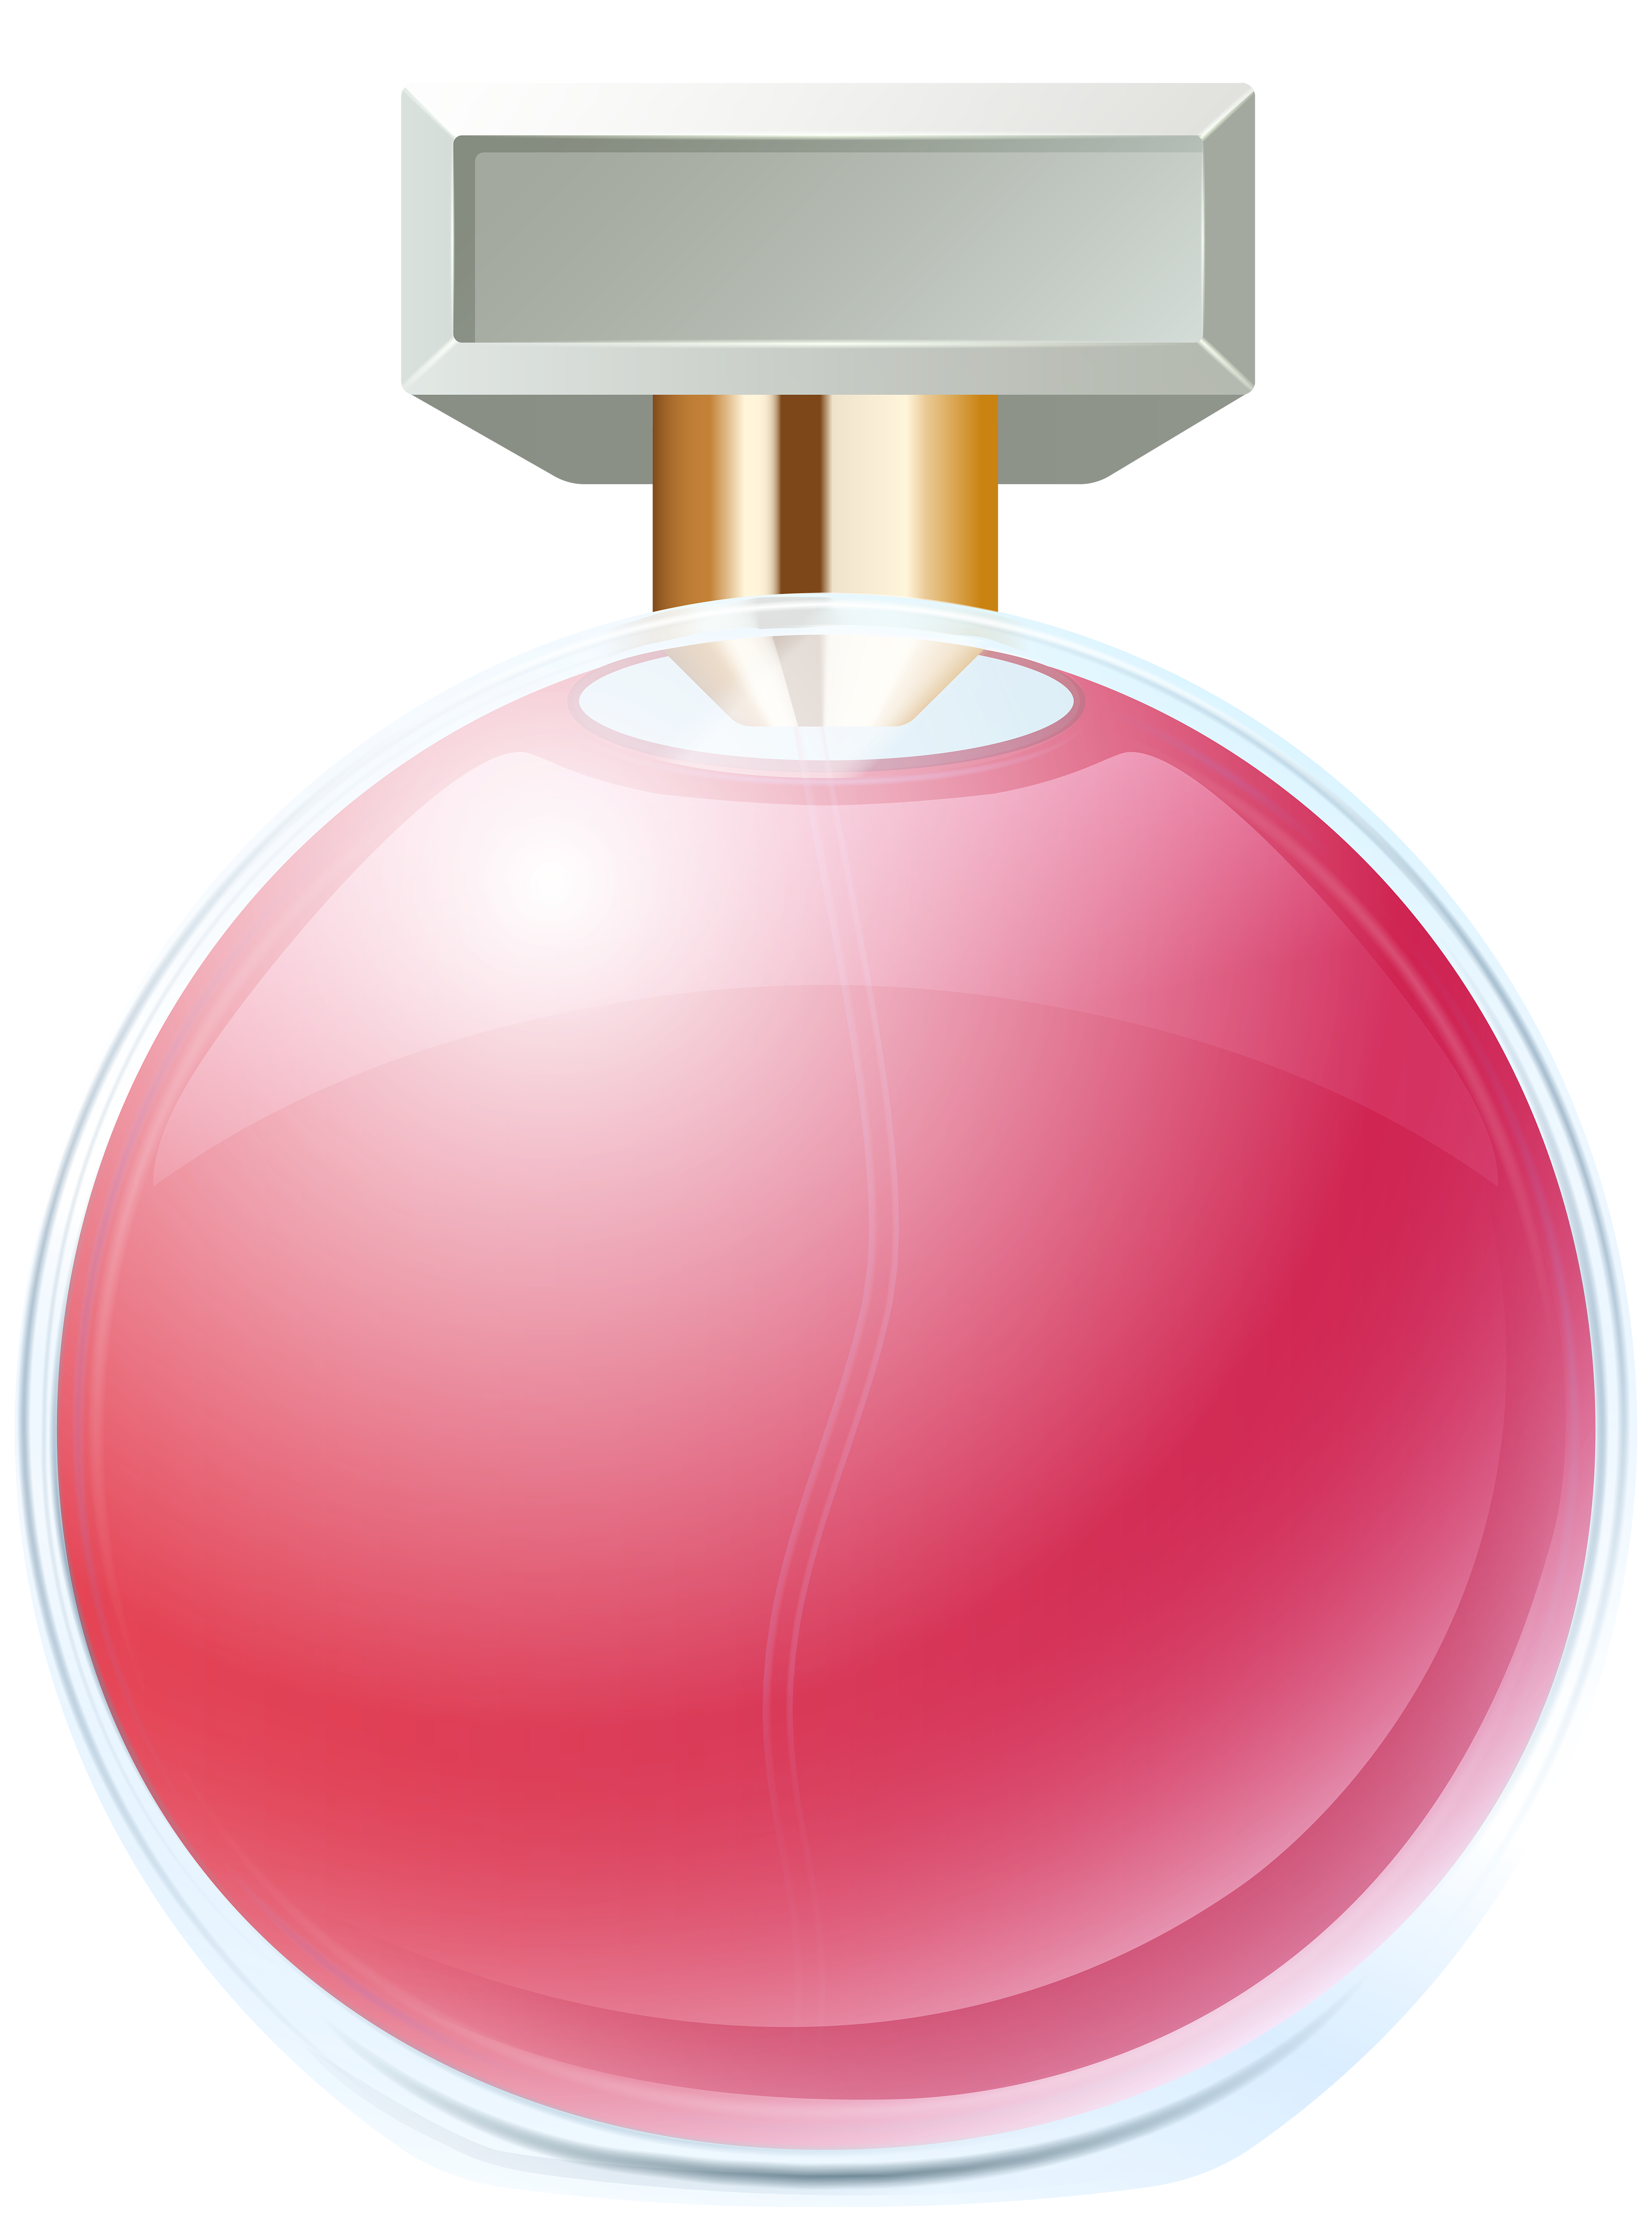 Perfume Bottle Transparent PNG Clip Art Image | Gallery Yopriceville